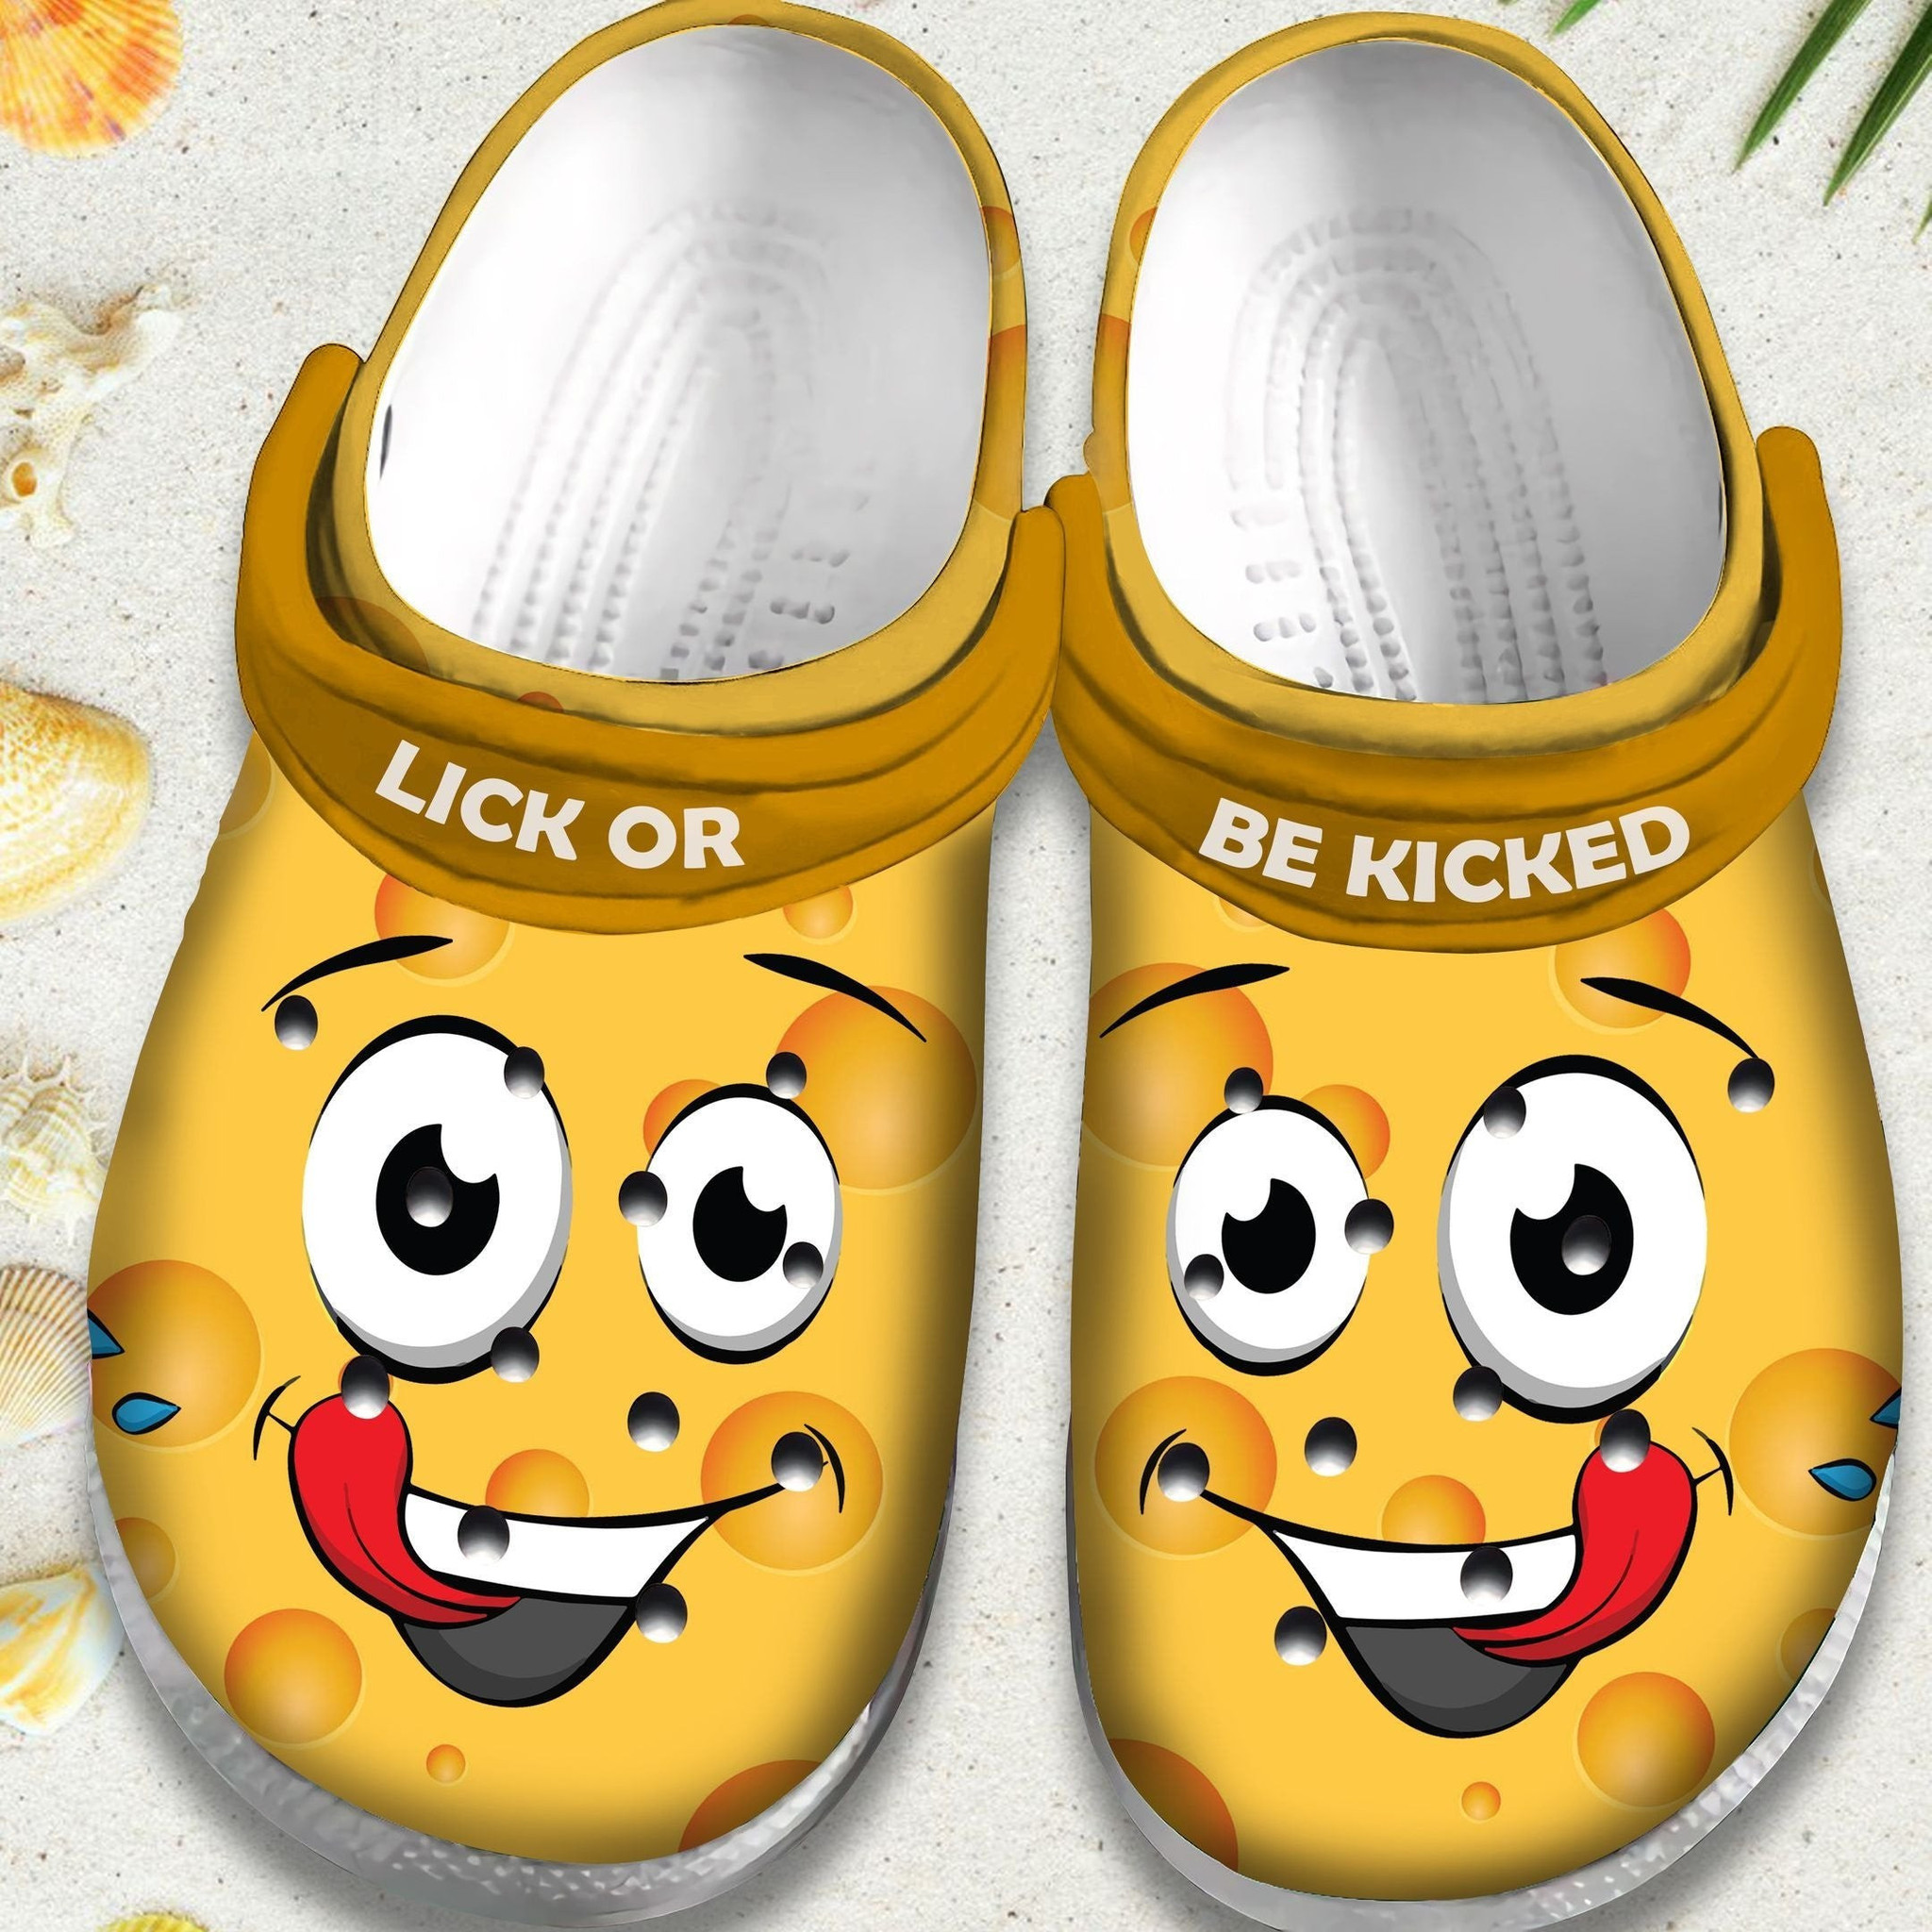 Lick Or Be Kicked Crocs Shoes - Smile Face Funny Clogs Gift For Birthday Christmas